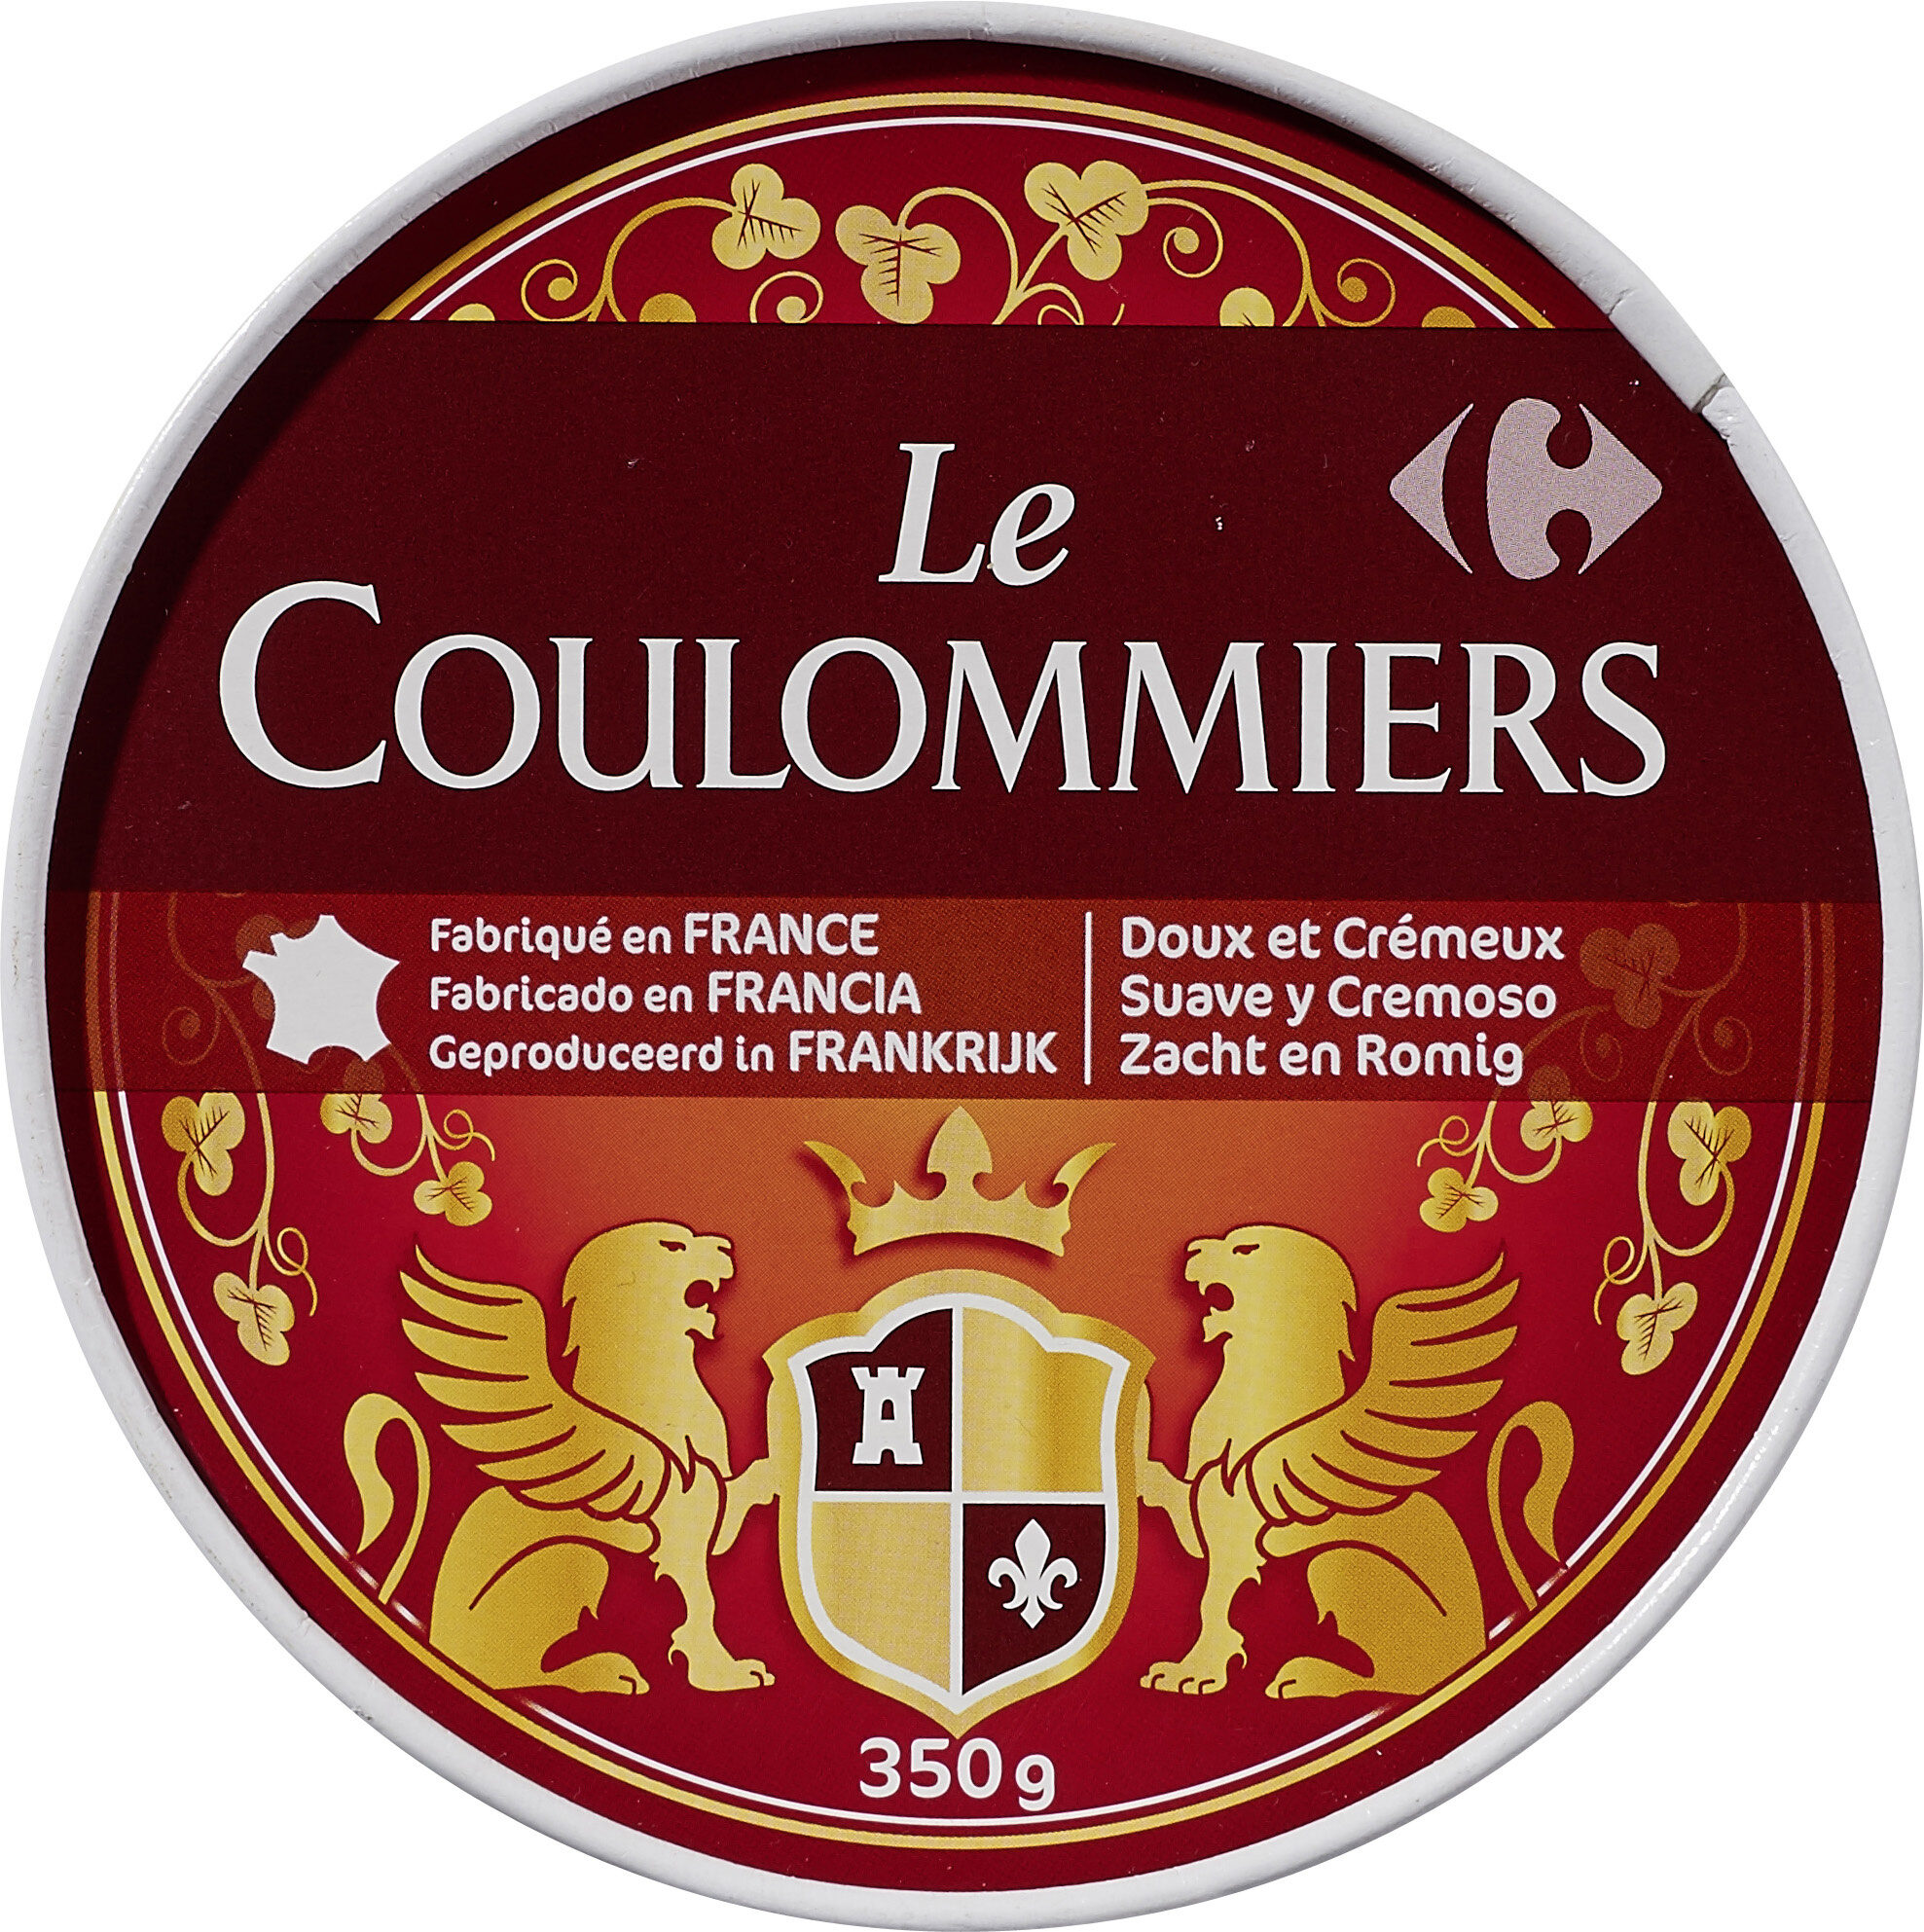 Le Coulommiers - Product - fr